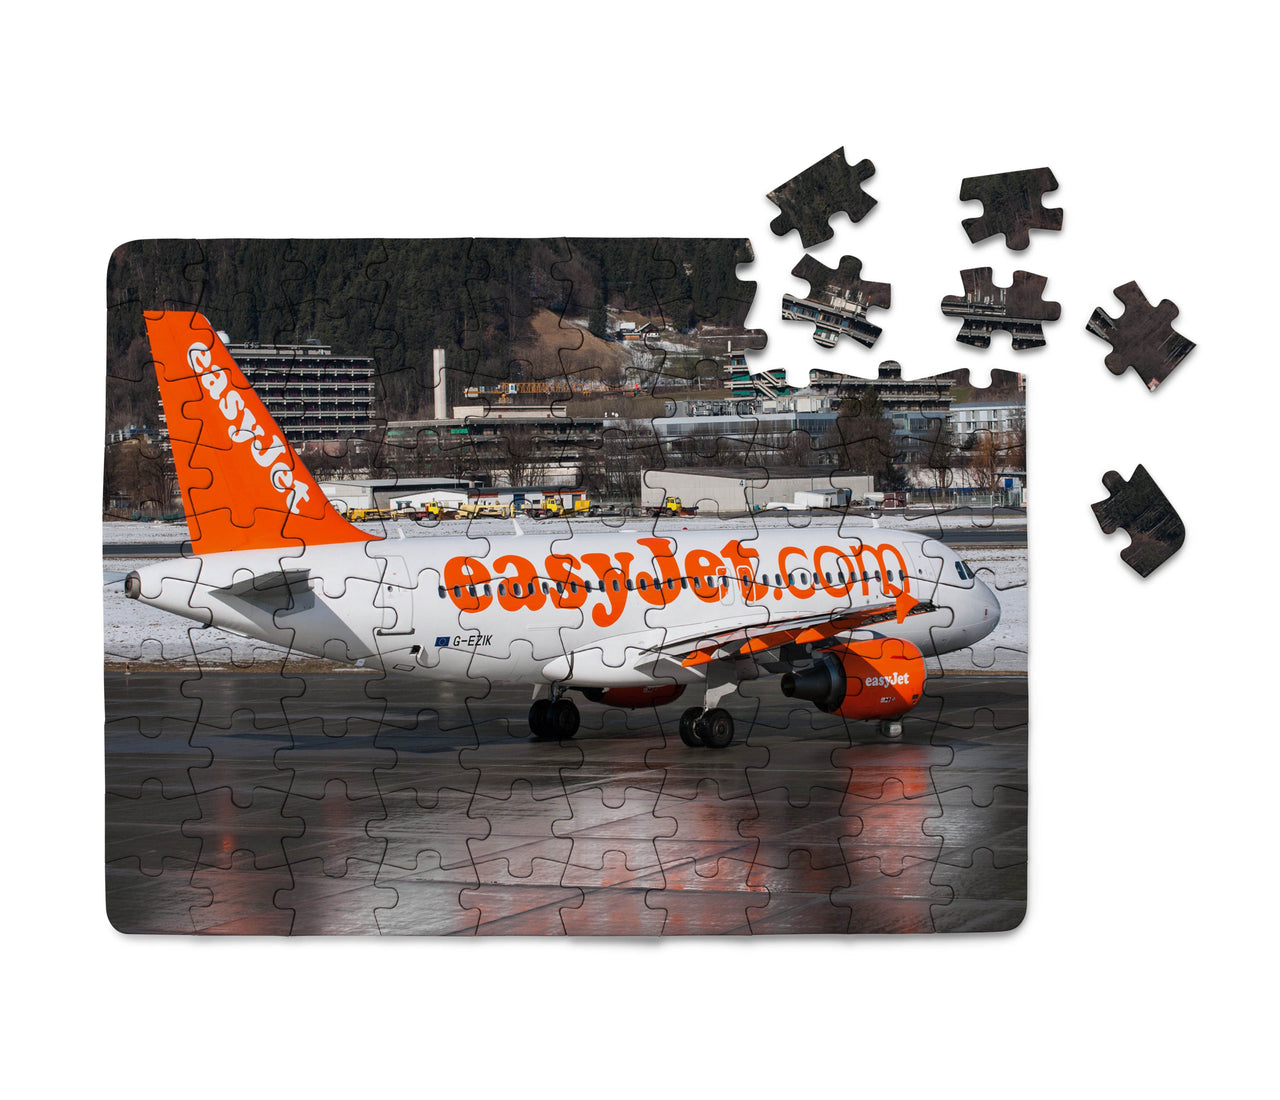 Easyjet's A320 Printed Puzzles Aviation Shop 